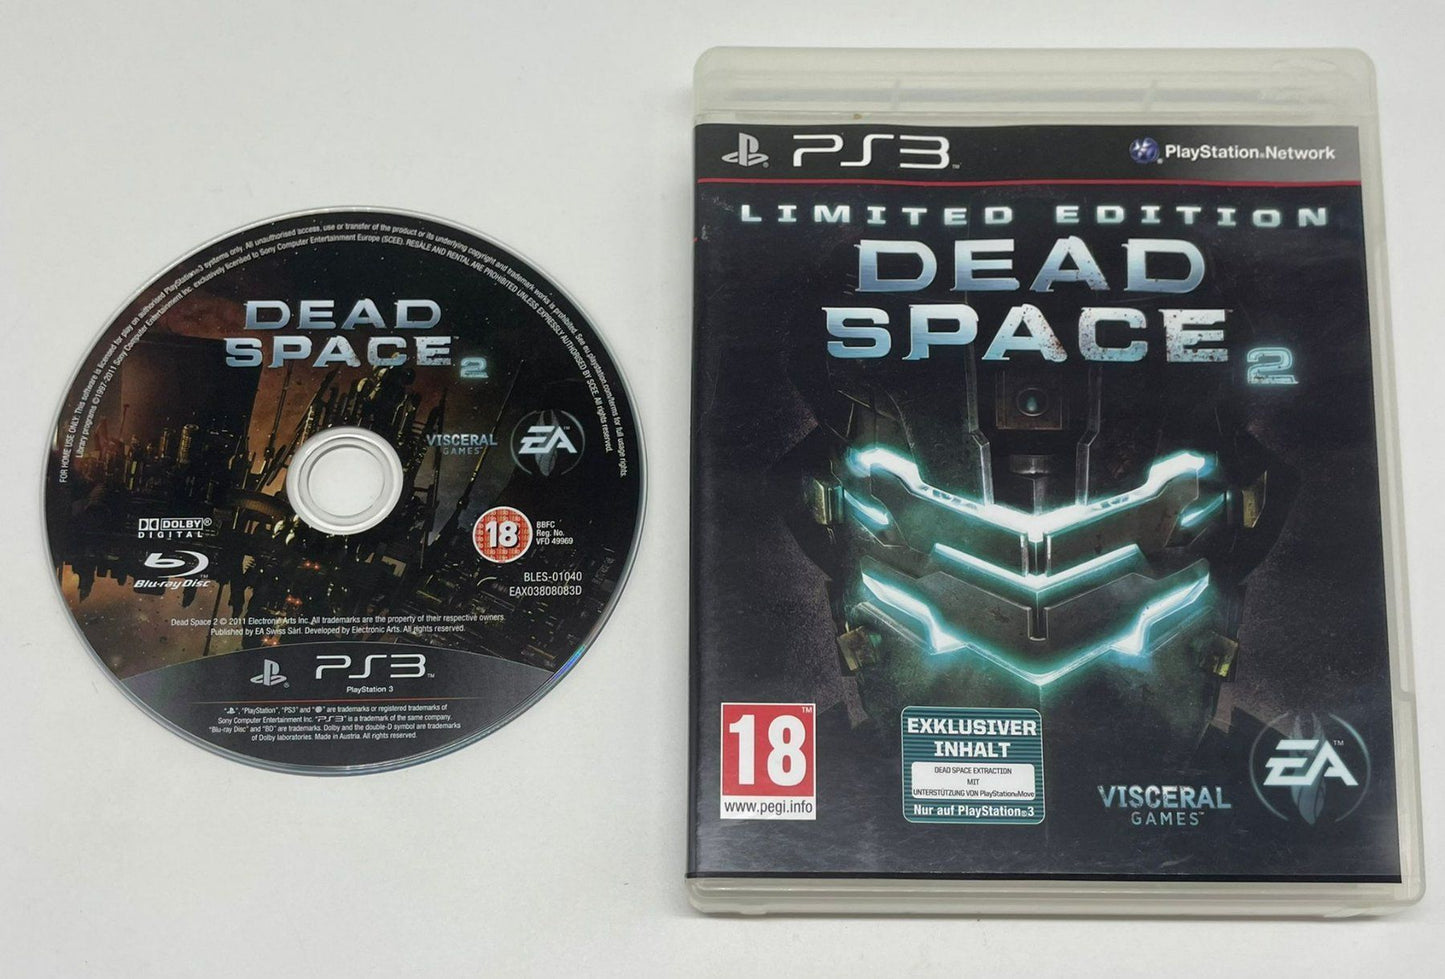 Dead Space 2 OVP